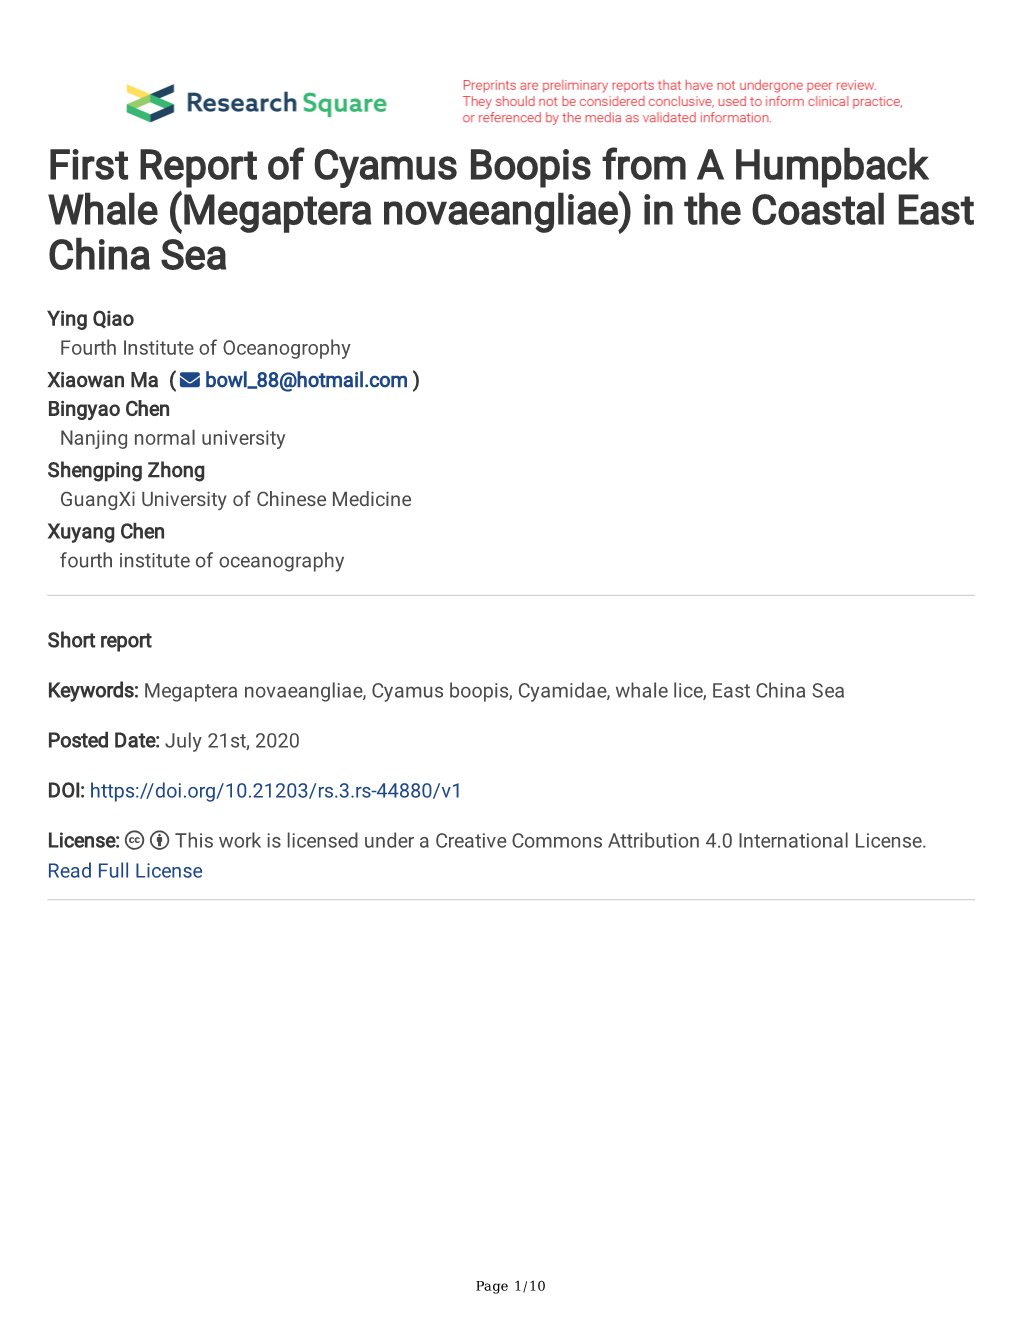 First Report of Cyamus Boopis from a Humpback Whale (Megaptera Novaeangliae) in the Coastal East China Sea